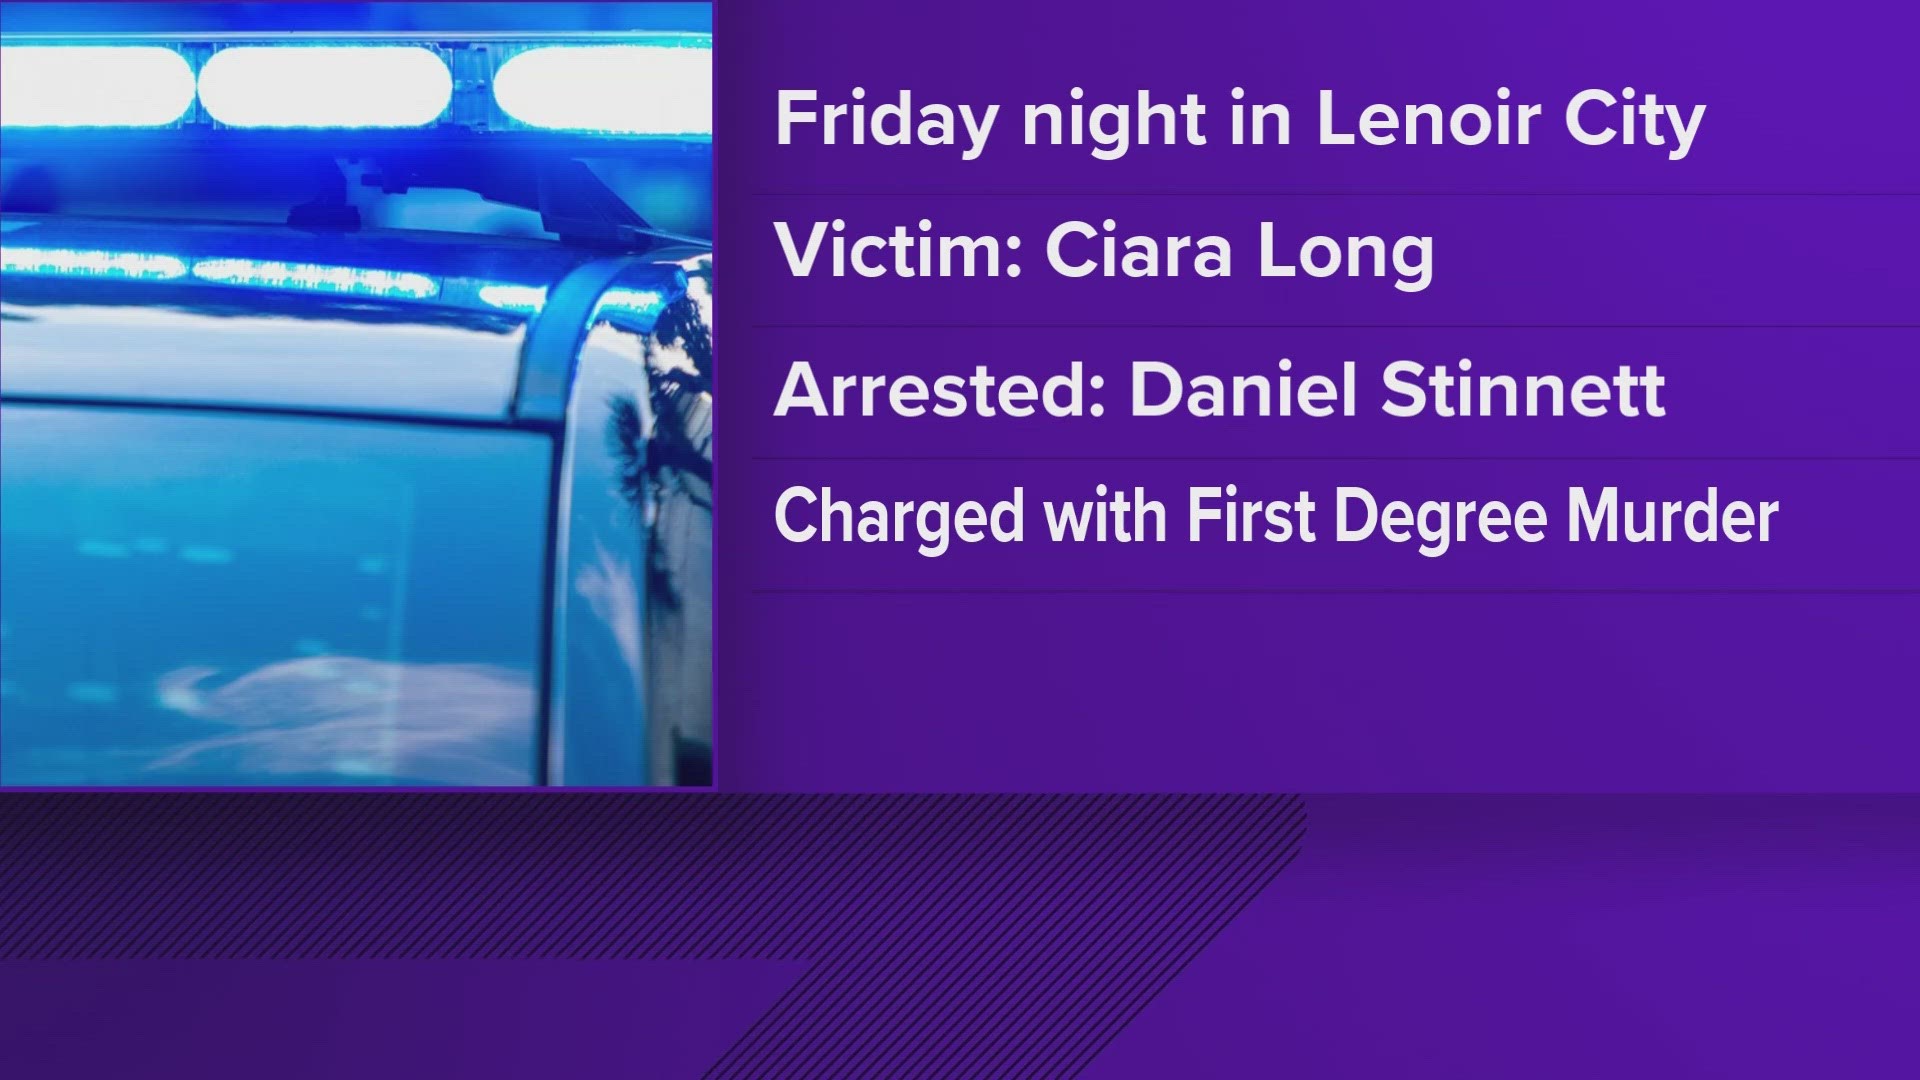 According to LCPD, Ciara Long was found dead in a common area of the complex after being stabbed multiple times.